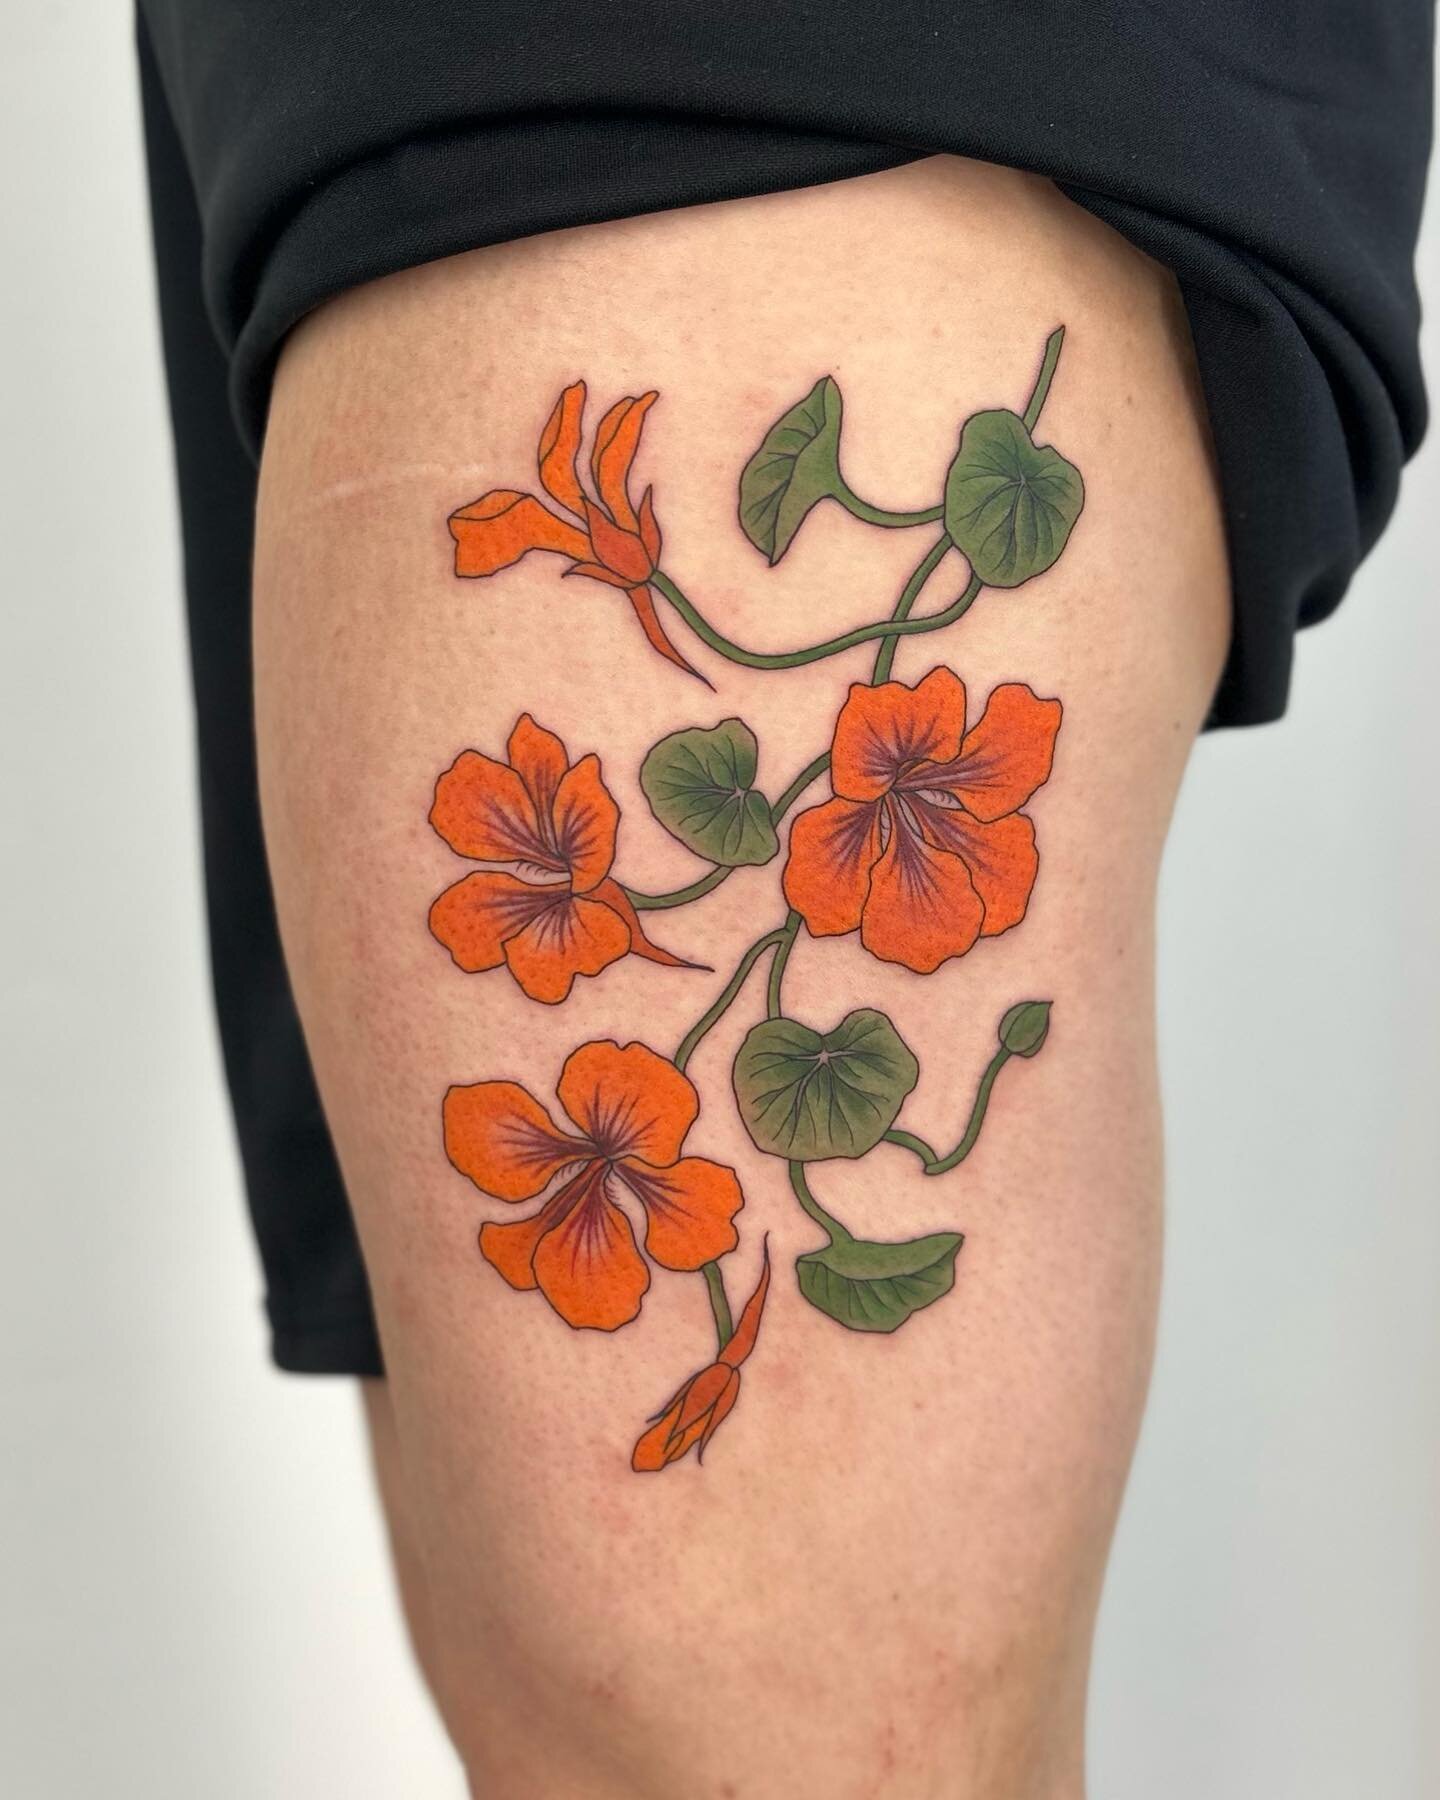 Nasturtiums for Carrie&rsquo;s first tattoo, thanks! ✨ Email paulajdaveytattoo@gmail.com for bookings